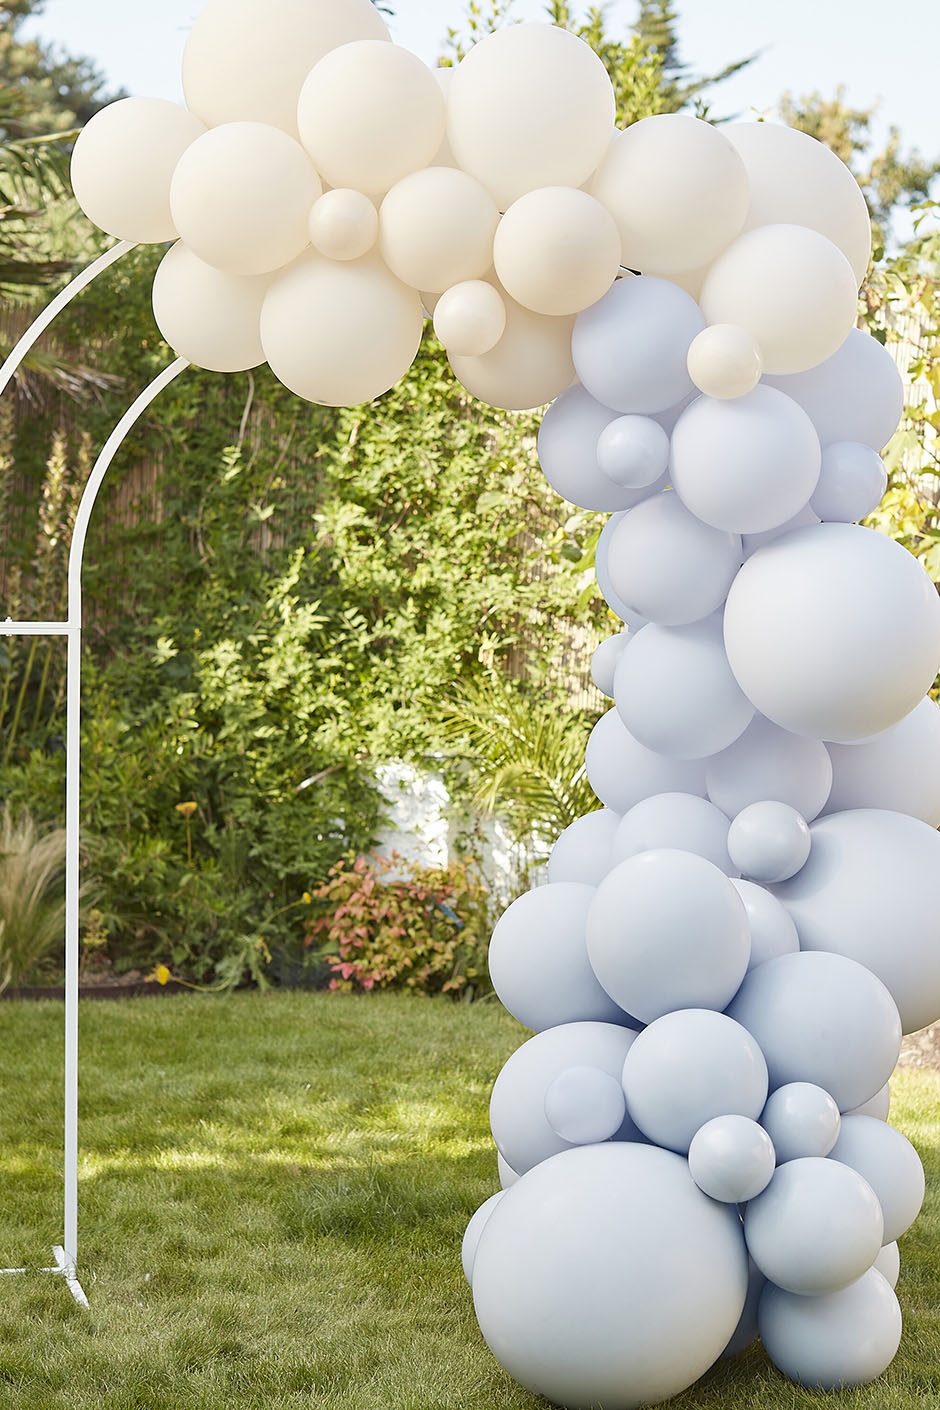 Nude and pastel blue balloon arch from Team Hen for Dancing Queens hen party theme